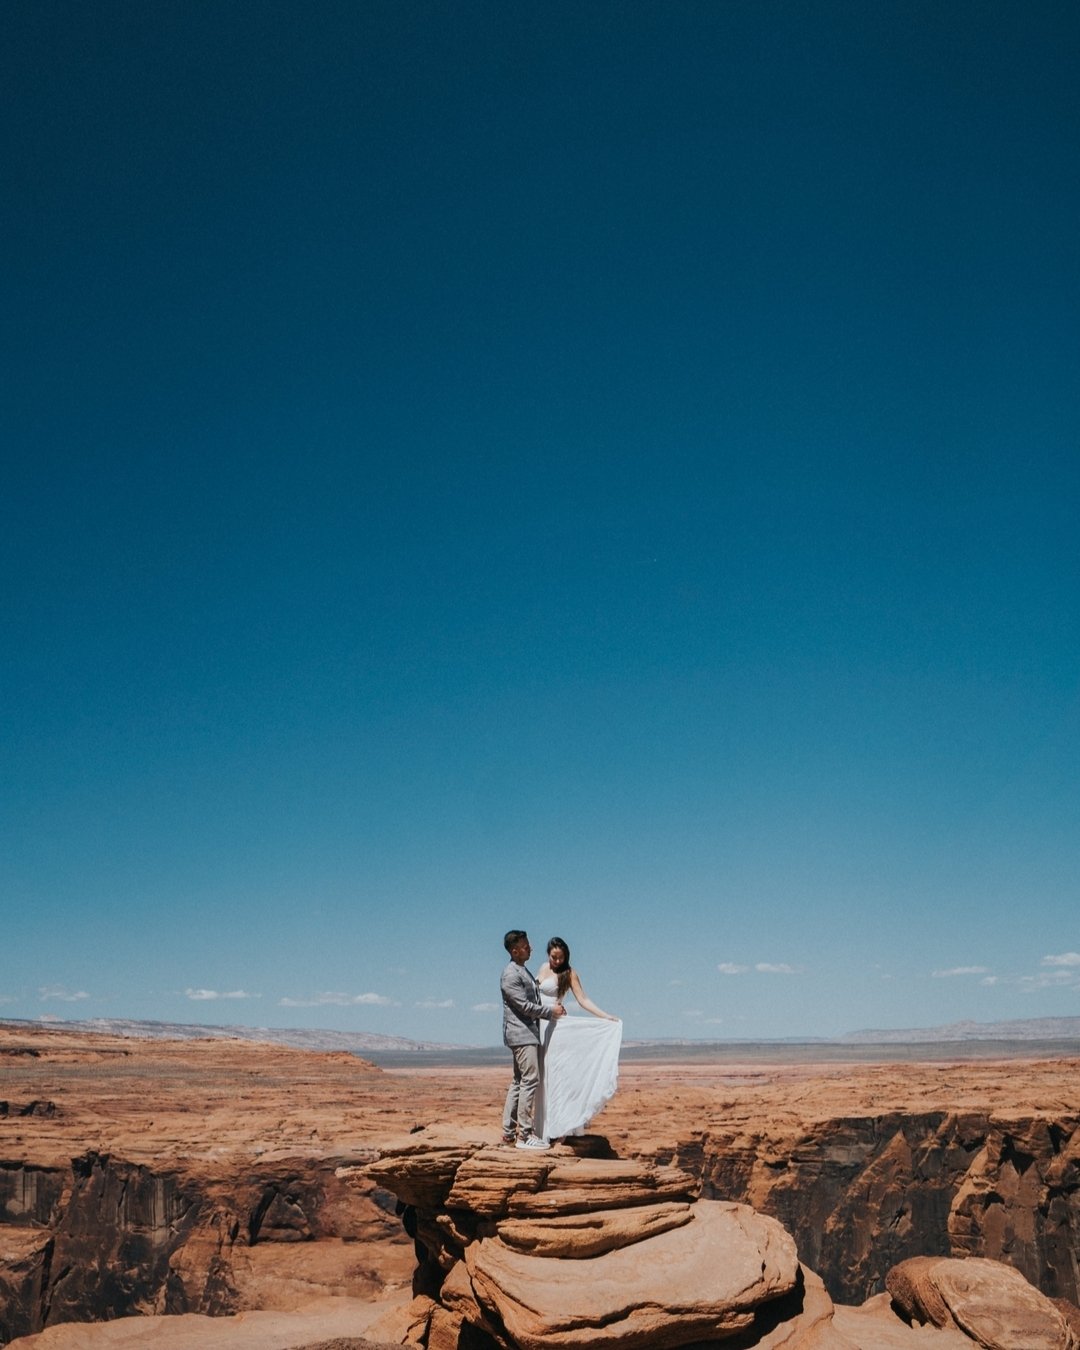 Margaret &amp; Matthew
.
They came to the states from Poland and got married in Las Vegas! After their wedding they started traveling around the west visiting a bunch of cool spots. We ran into them at Horseshoe Bend in Arizona, and I decided to try 